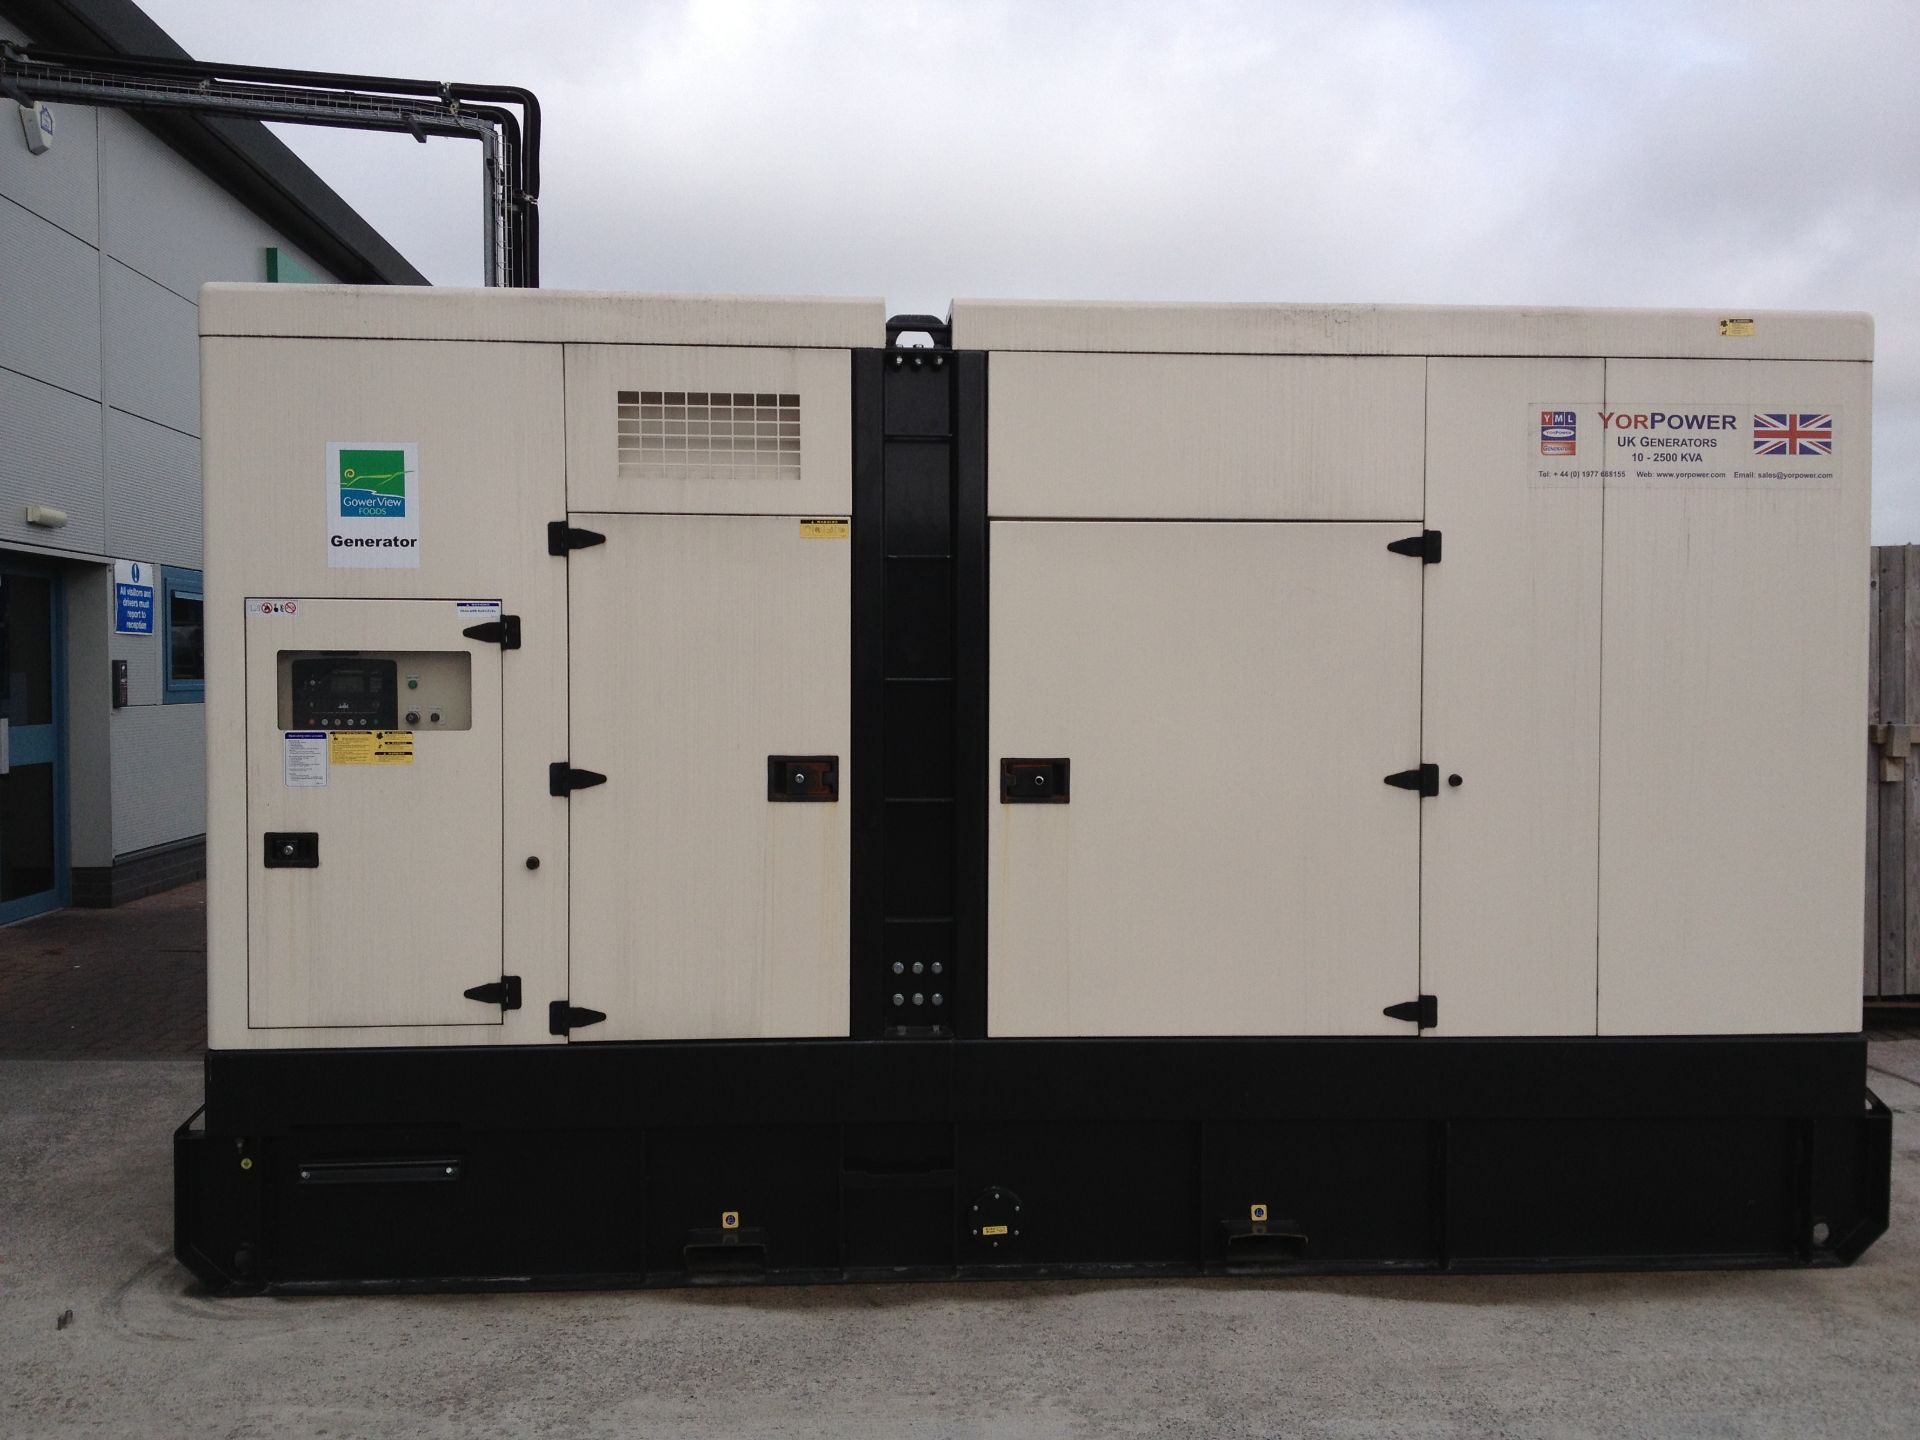 Genset Generator. 350 KVA. The generator has done 336hrs and is a Perkins engine - Bild 2 aus 10